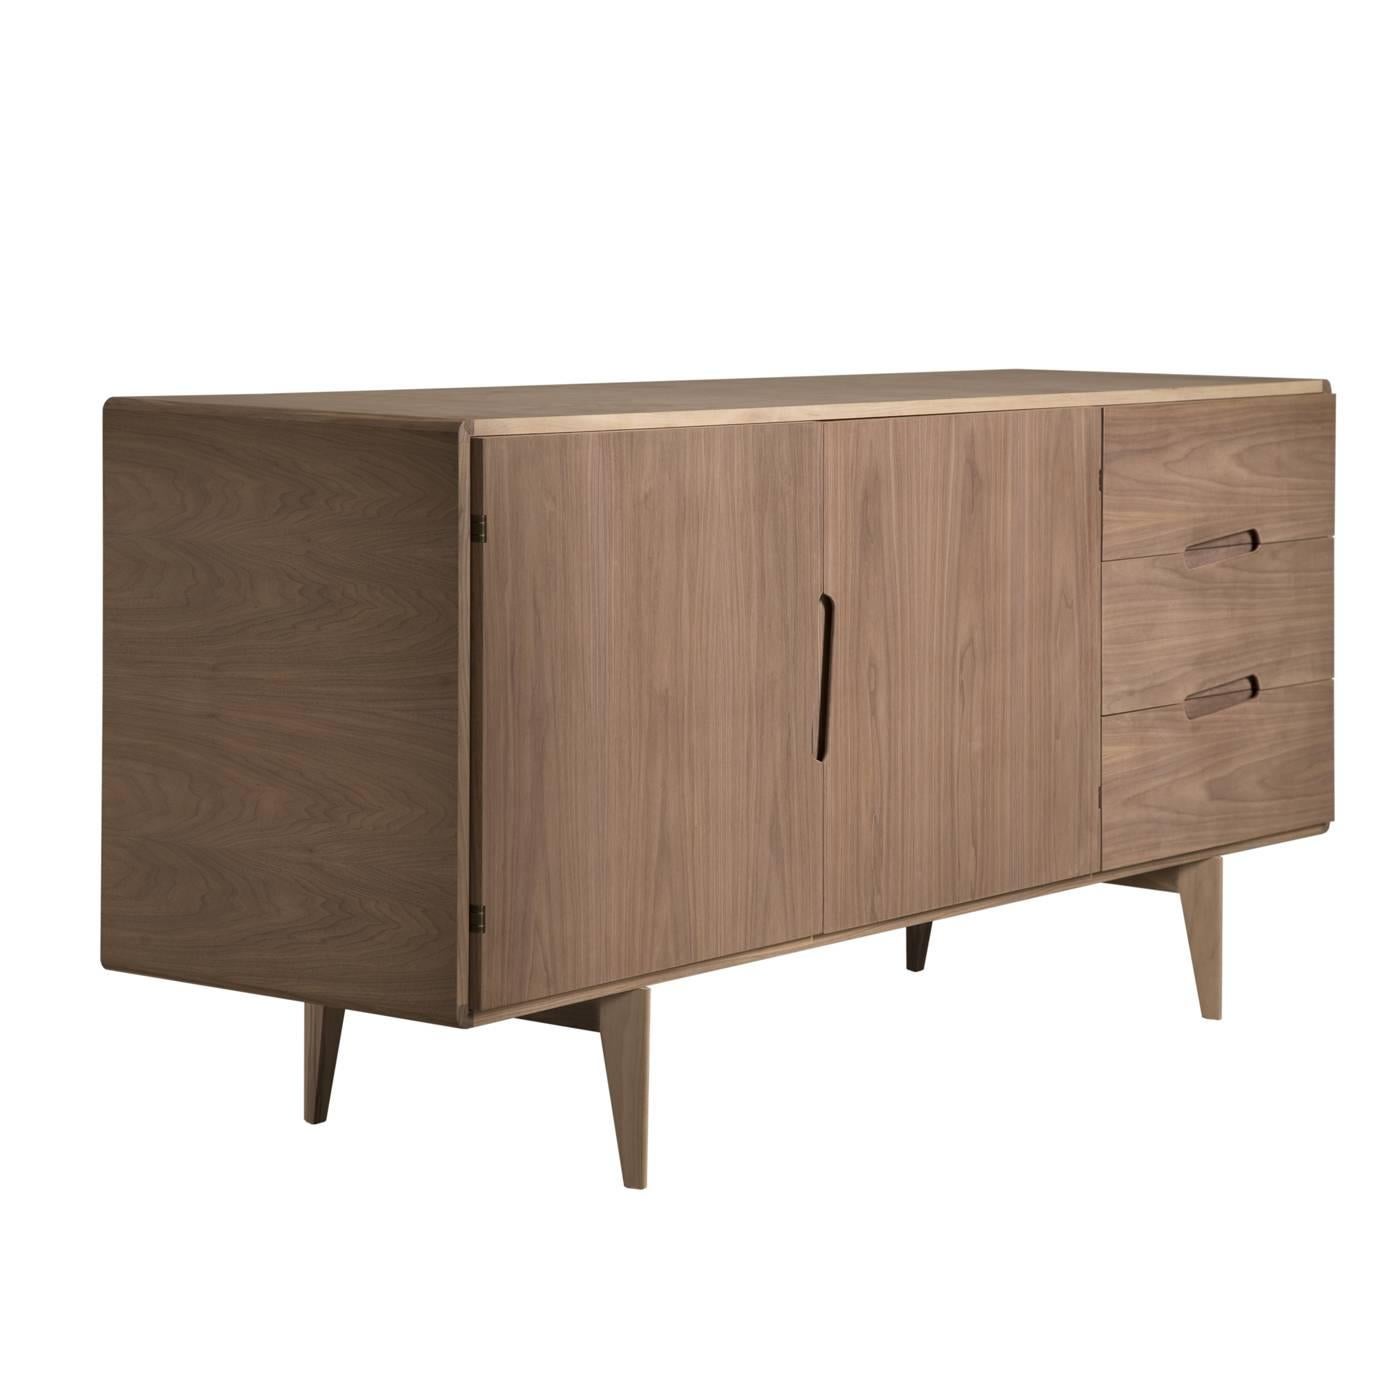 This elegant sideboard is inspired by the style of Californian furniture in the 1960s and 1970s. This living room and bedroom furniture collection was developed by the internal research centre of the MAAM (a museum of art and furnishing with which